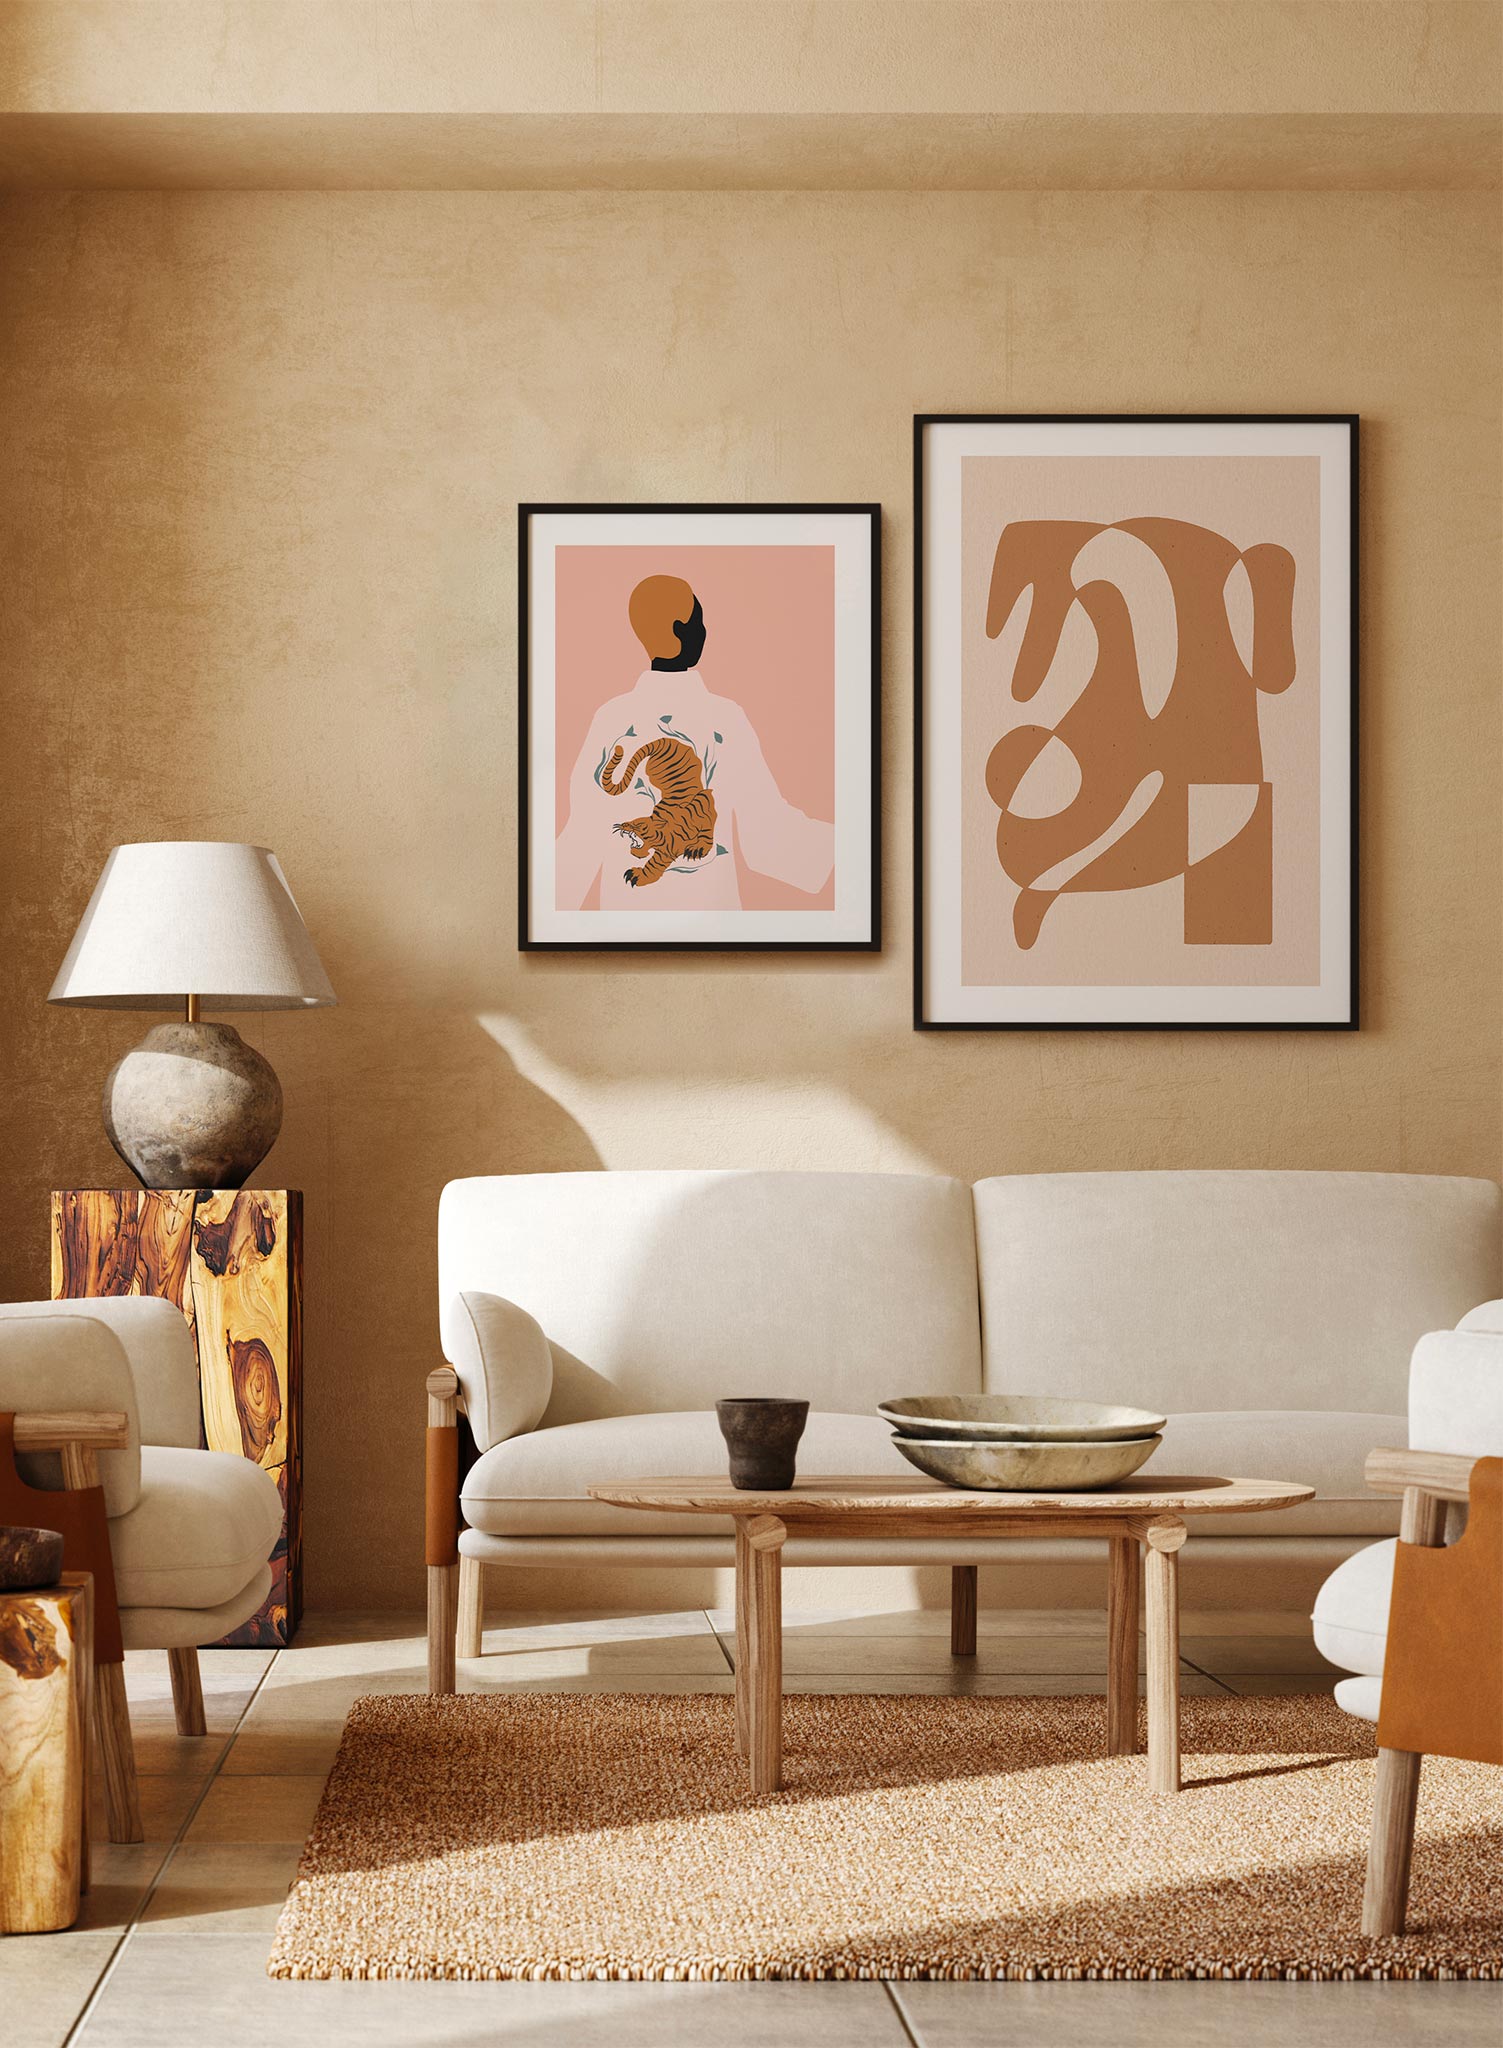 Melting Ochre is a minimalist abstract illustration of a big unusual shape with holes by Opposite Wall.